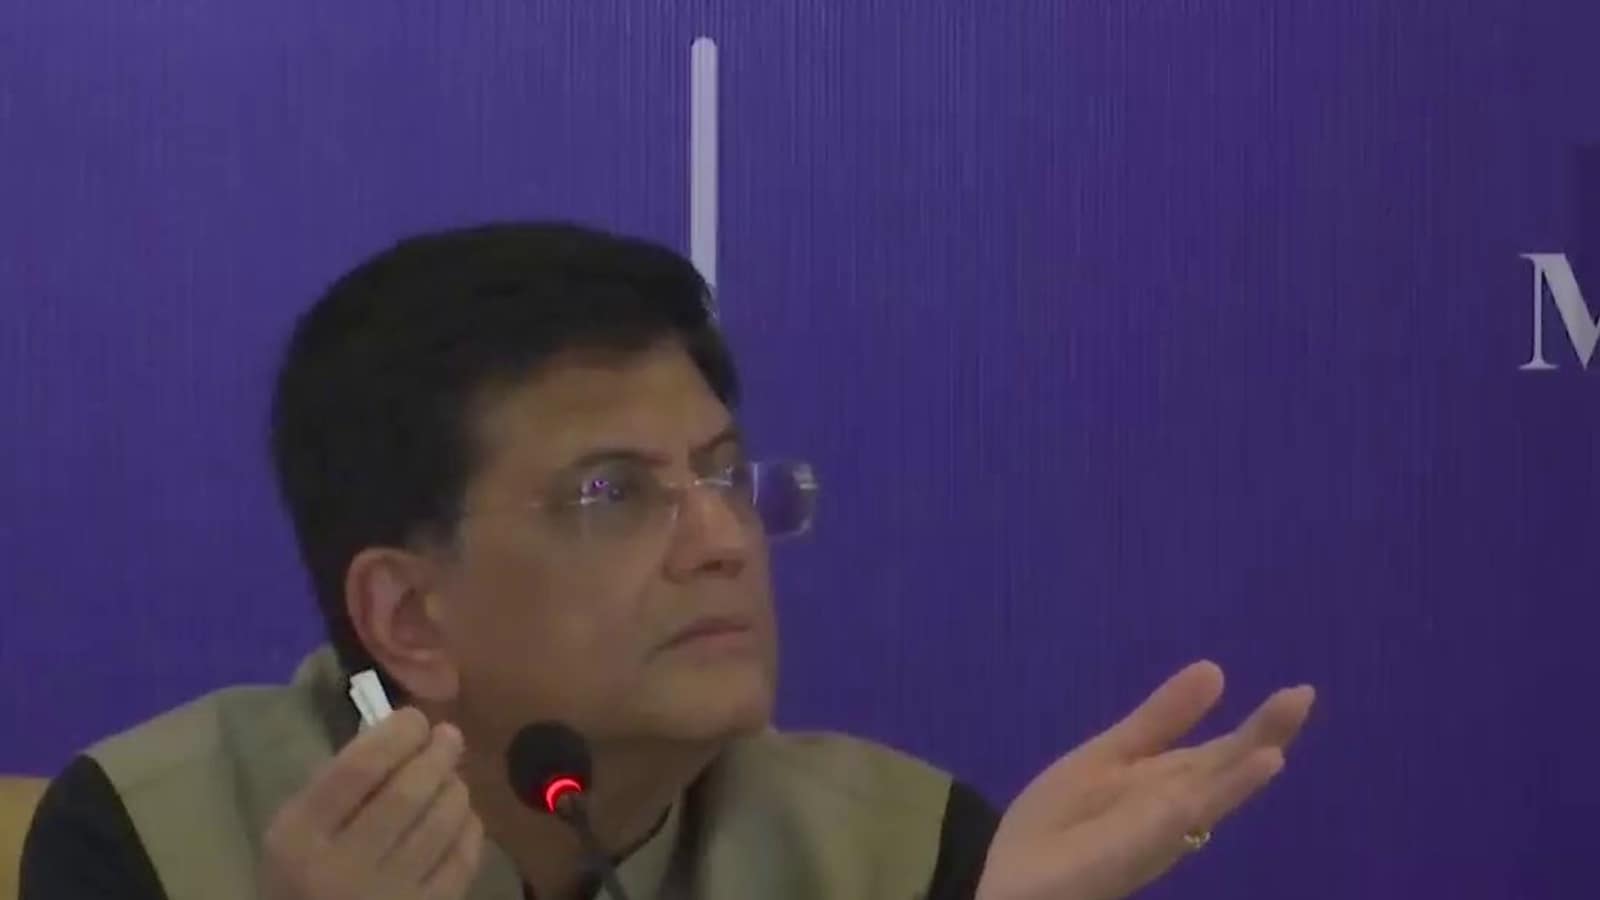 Structural Reforms In Past 8 Years Will Help India Emerge Among Top-3 Economies: Piyush Goyal